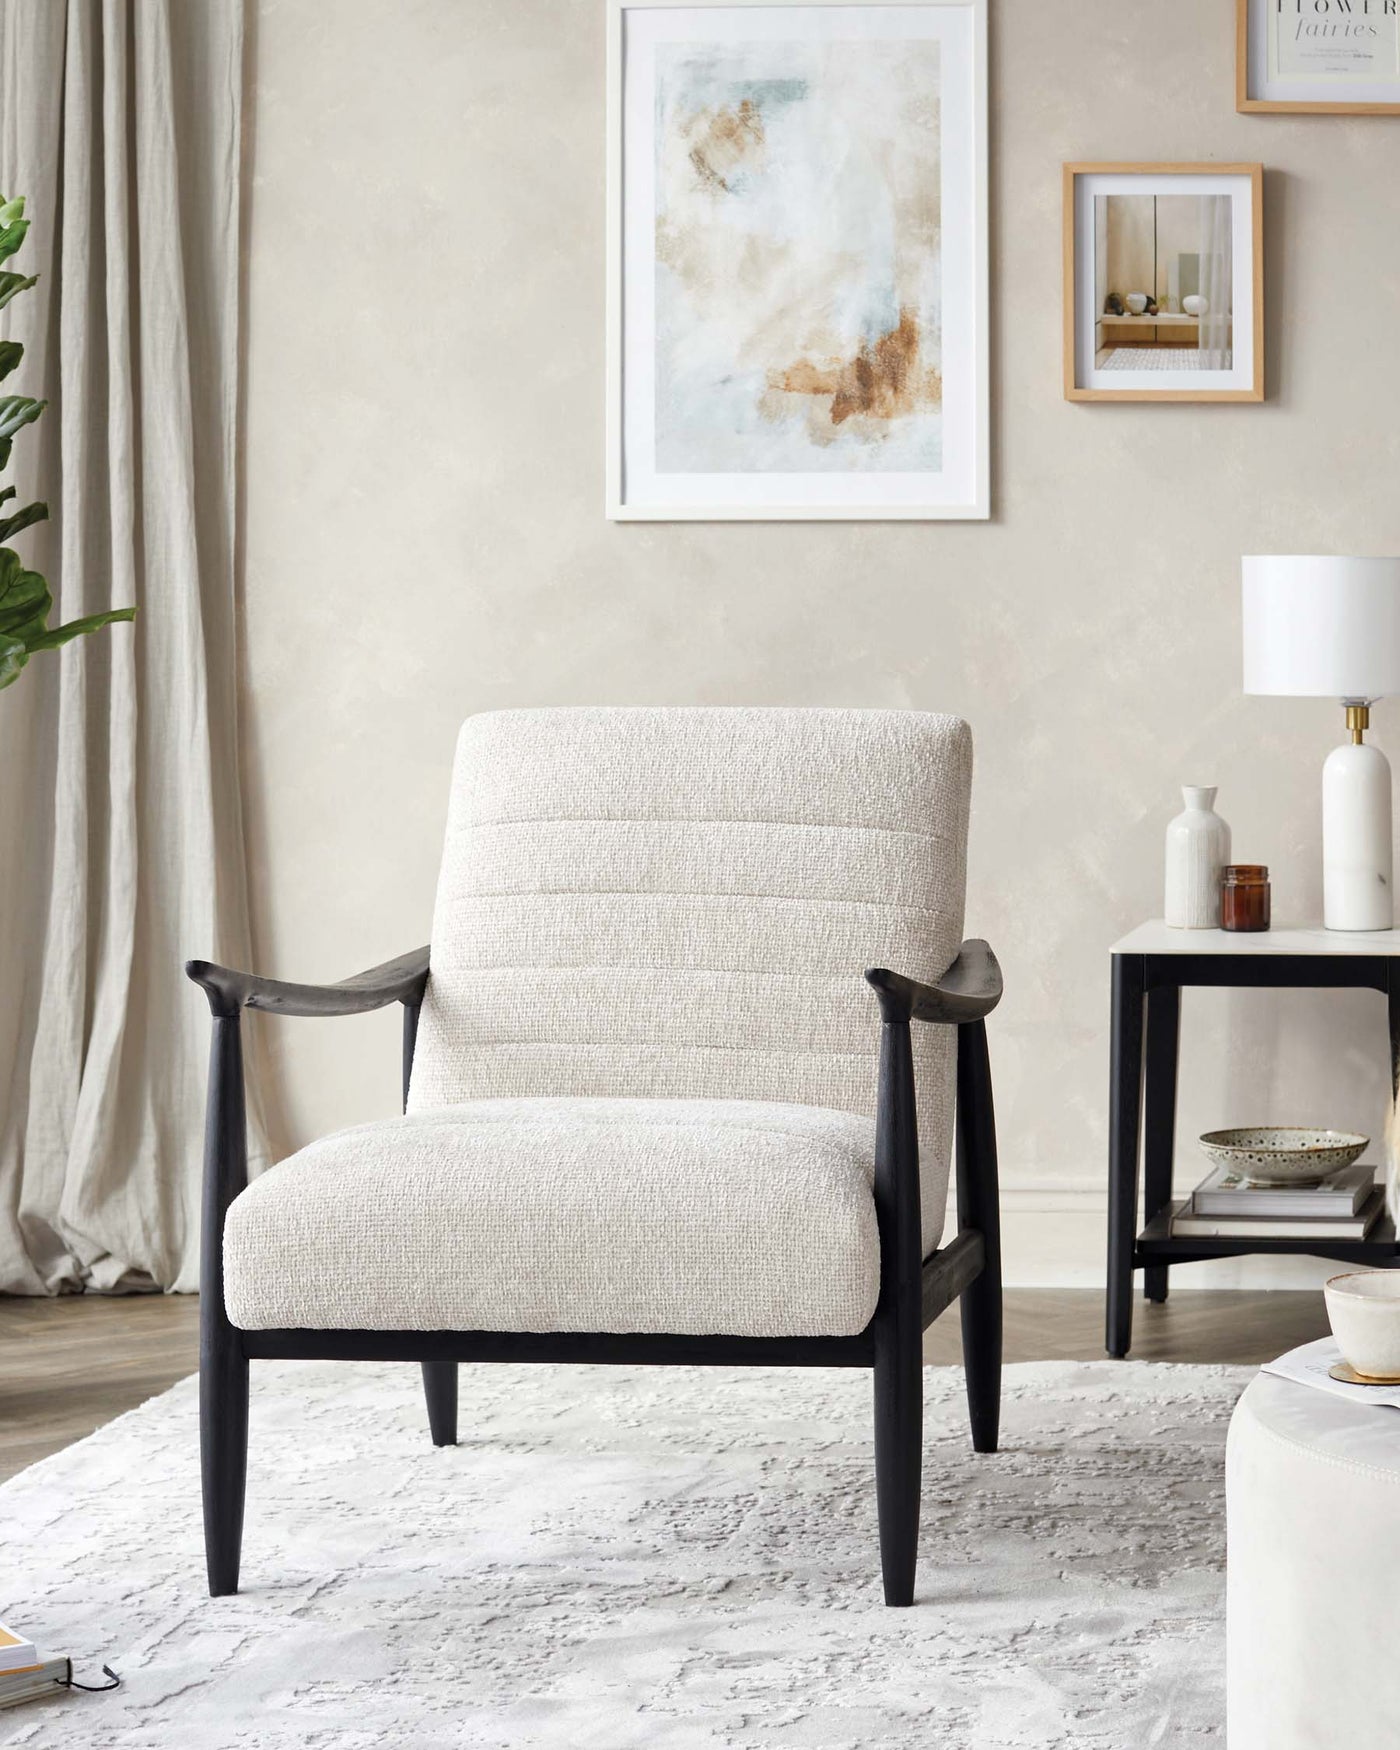 Elegant contemporary accent chair with a beige textured fabric upholstery and sleek black wooden frame, complemented by a minimalist black side table with a lower shelf, set in a stylish room with decorative accents.